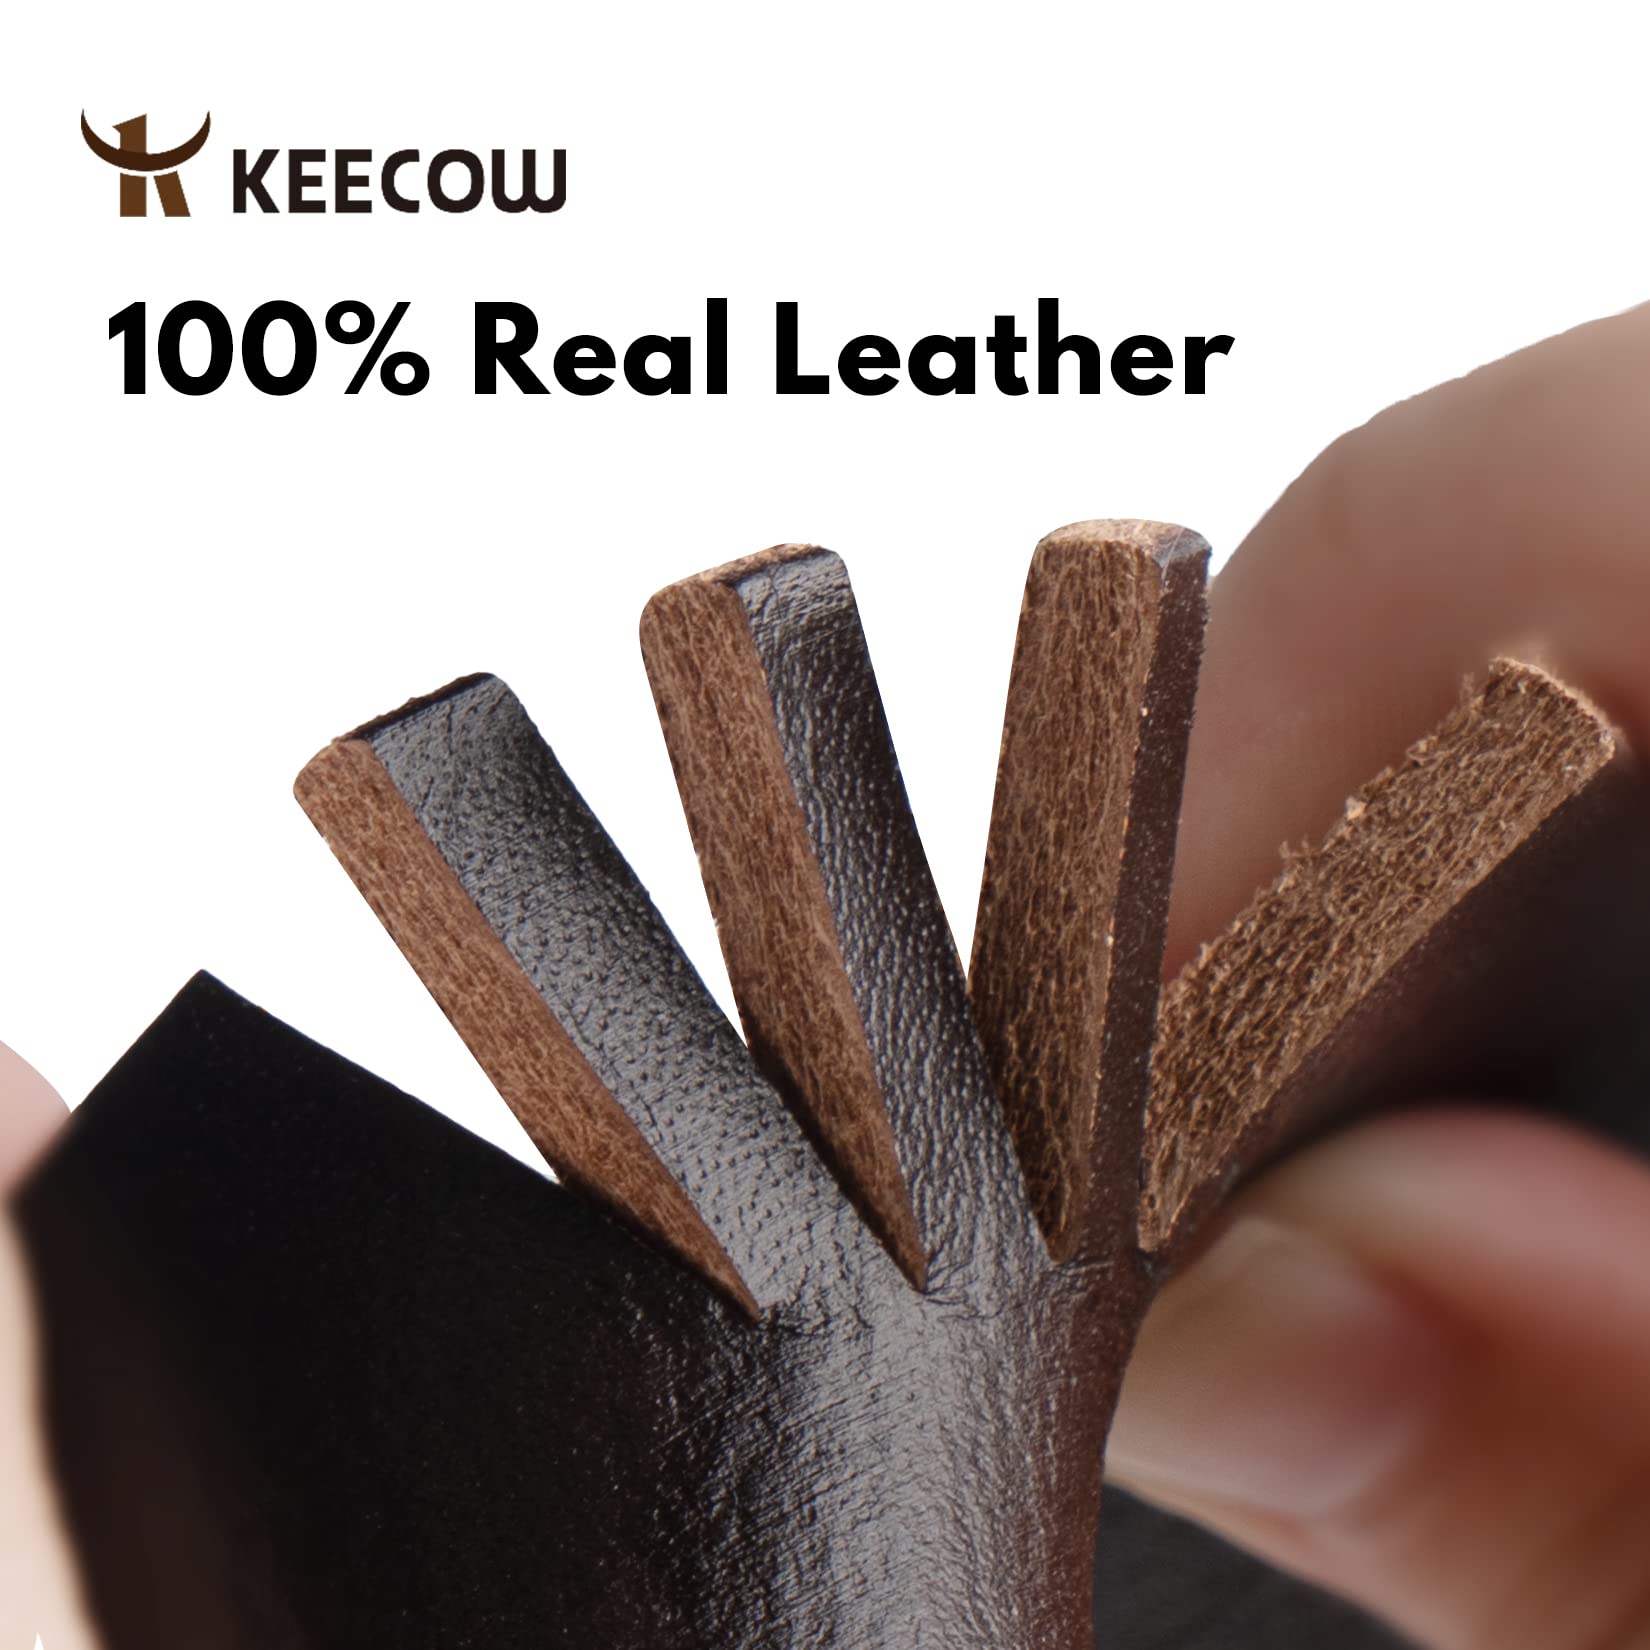 KEECOW Men's 100% Italian Cow Leather Belt Men With Anti-Scratch Buckle,Packed in a Box